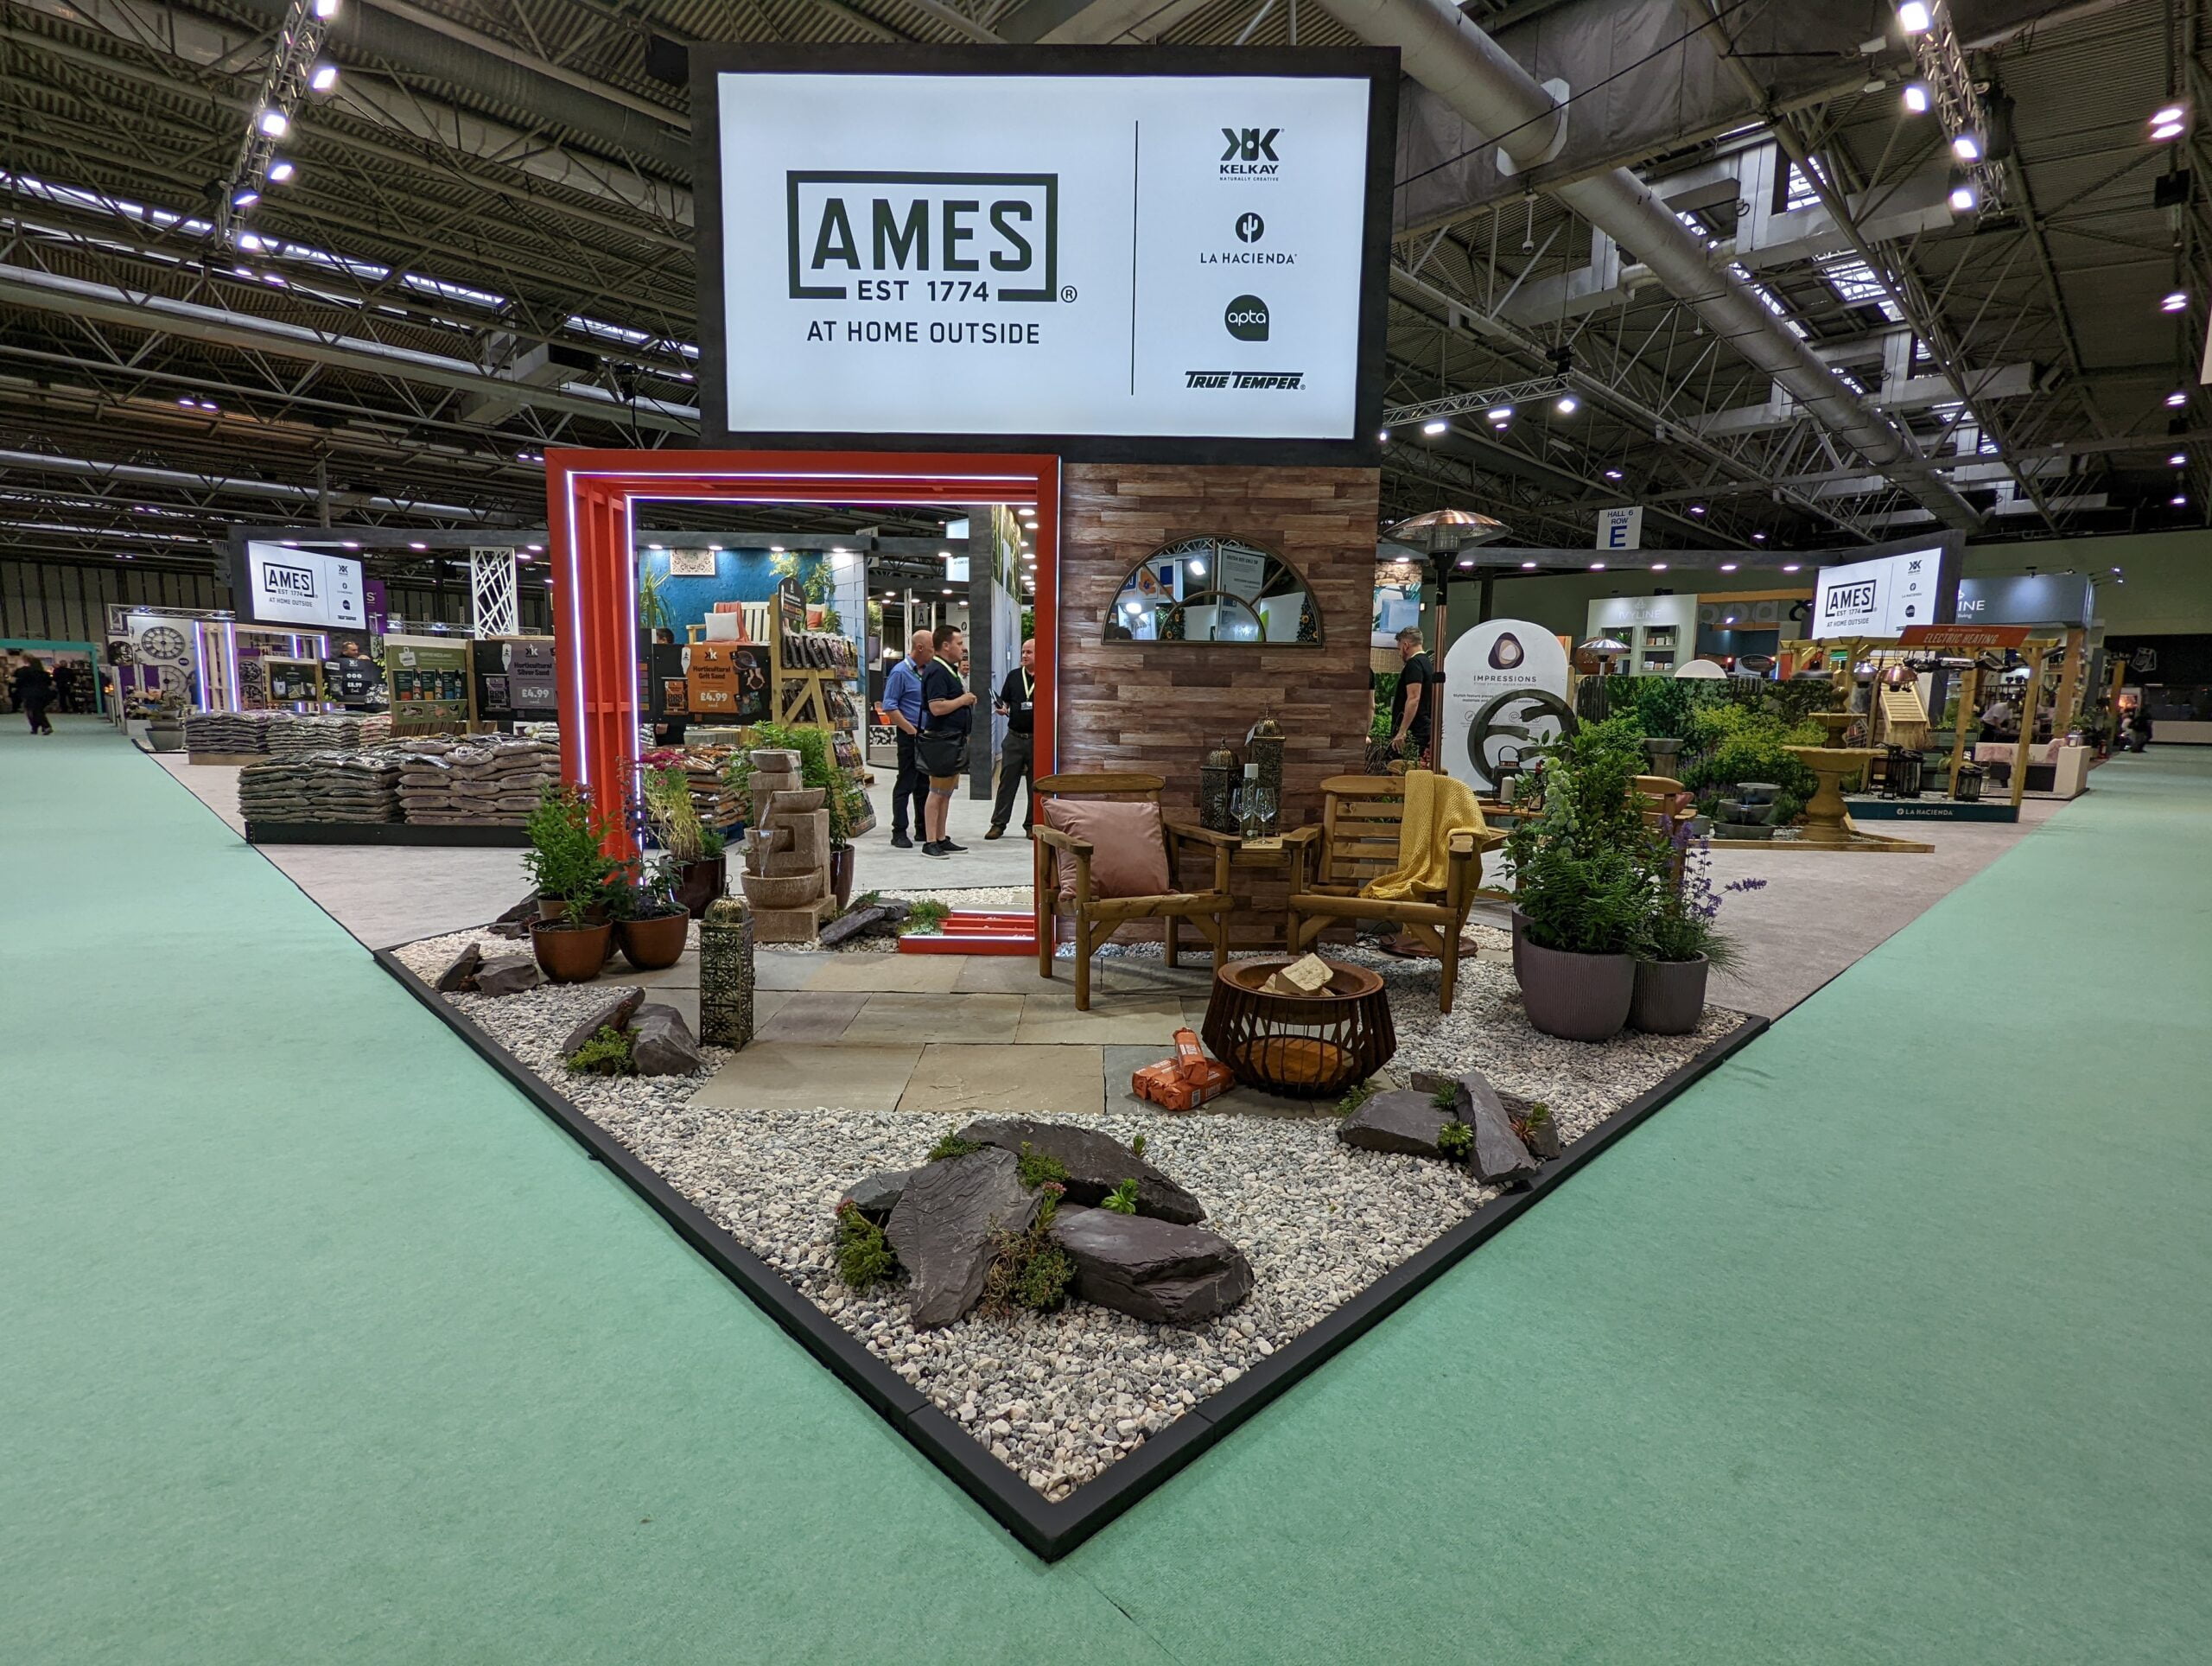 The AMES UK stand at Glee Birmingham in 2022